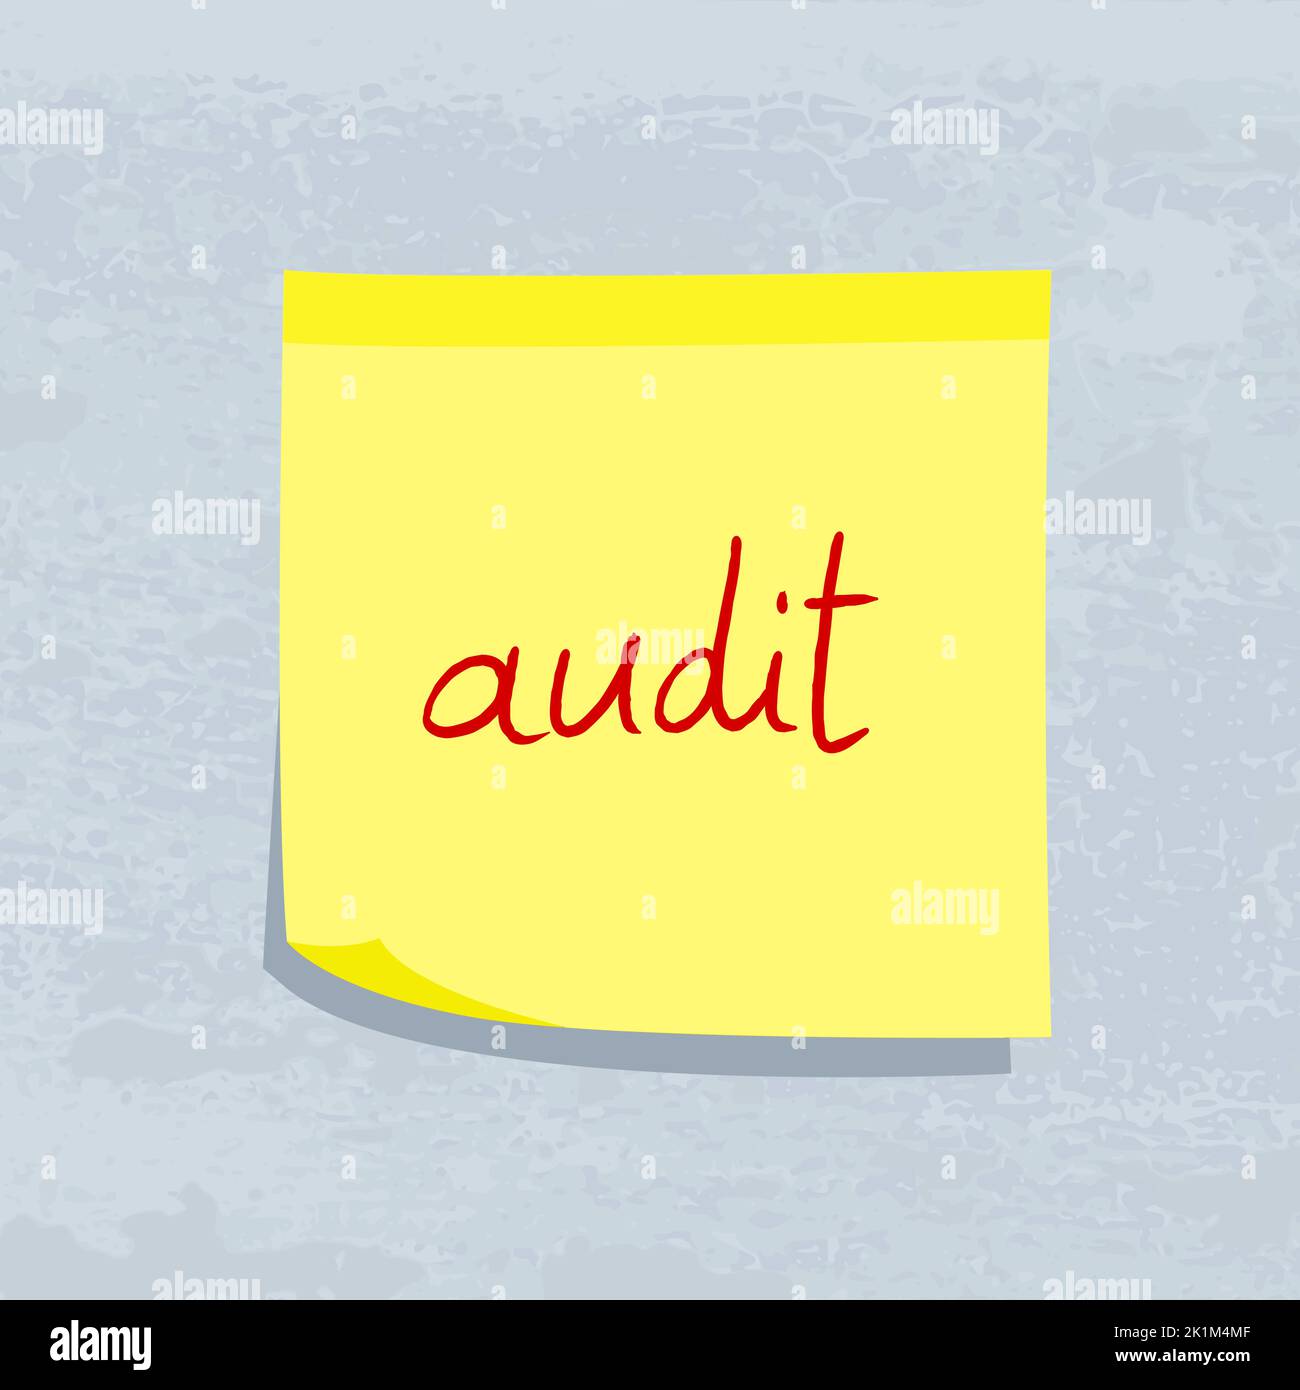 Audit message. Yellow sticky note message. Paper sign. Stock Vector